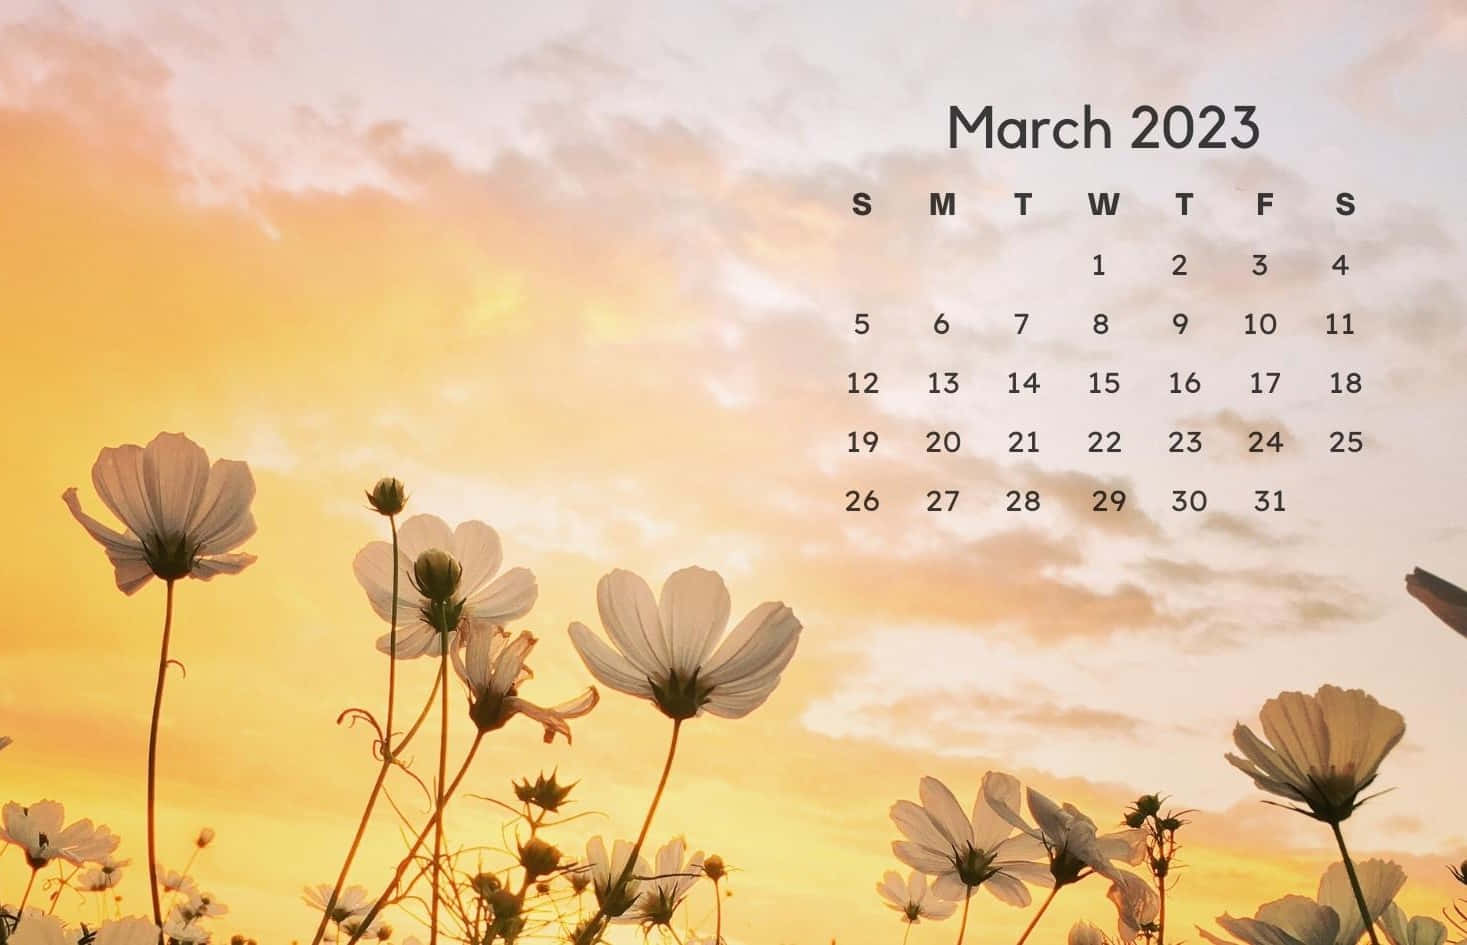 "Welcome to March - enjoy the beauty of spring's renewal"